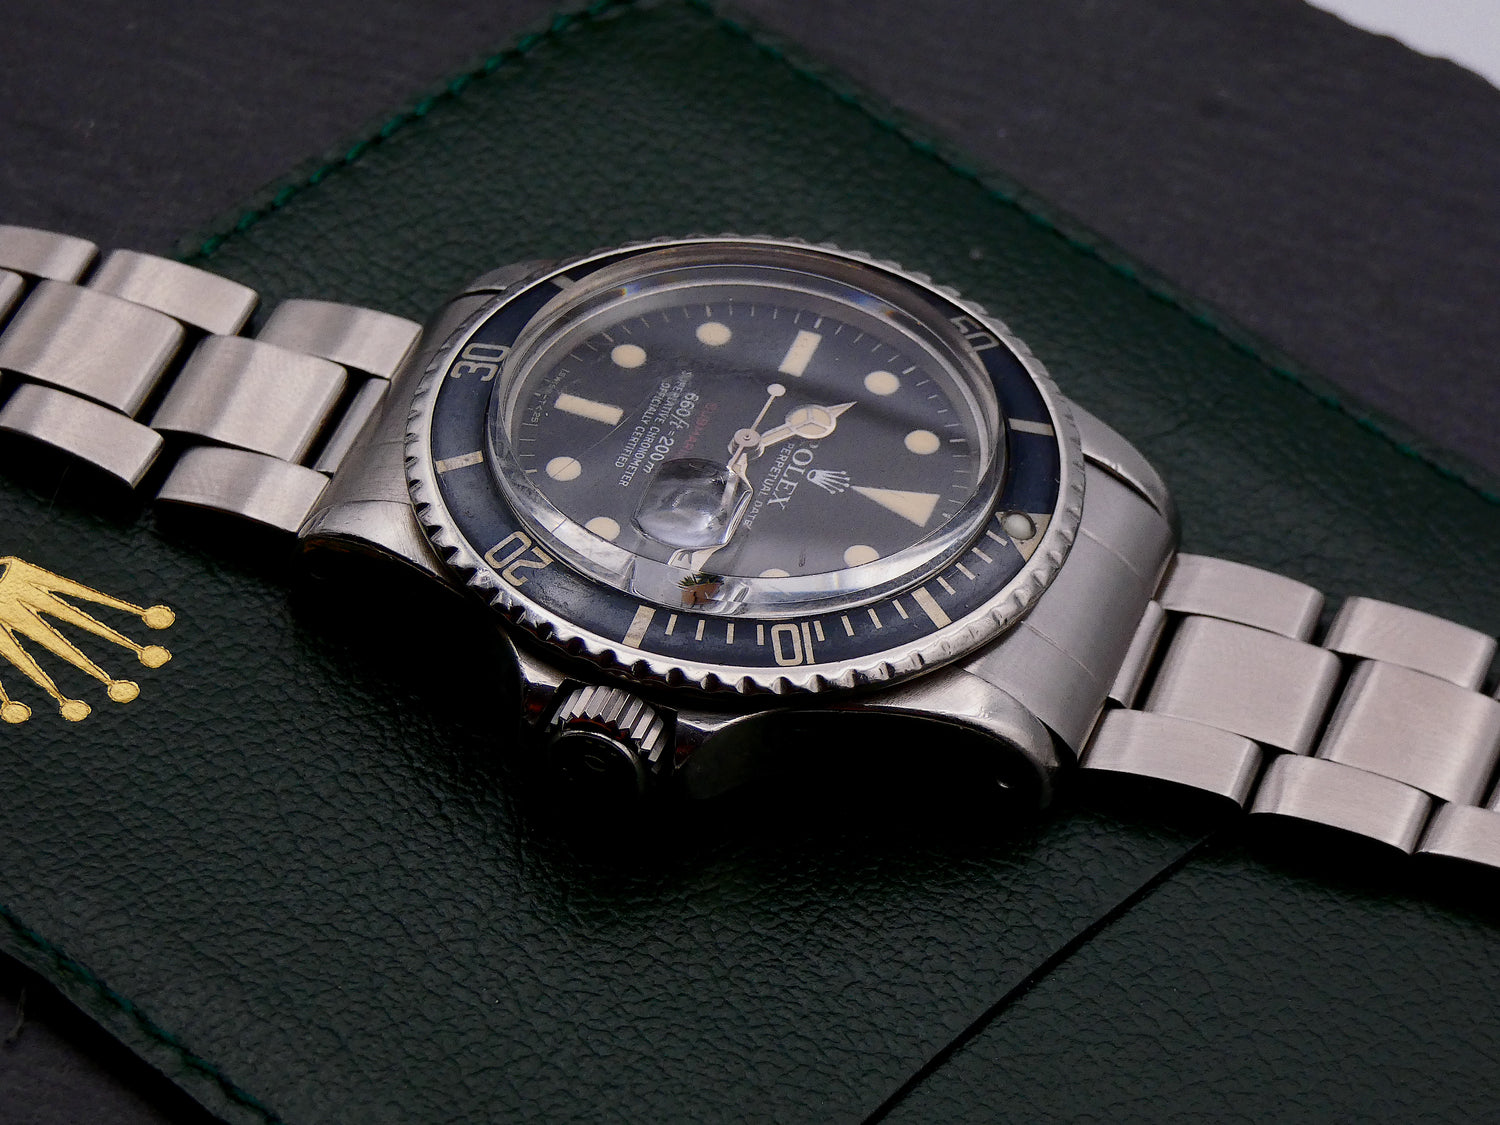 SOLD Rolex Submariner Date / Single Red / 1974 / blue faded bezel